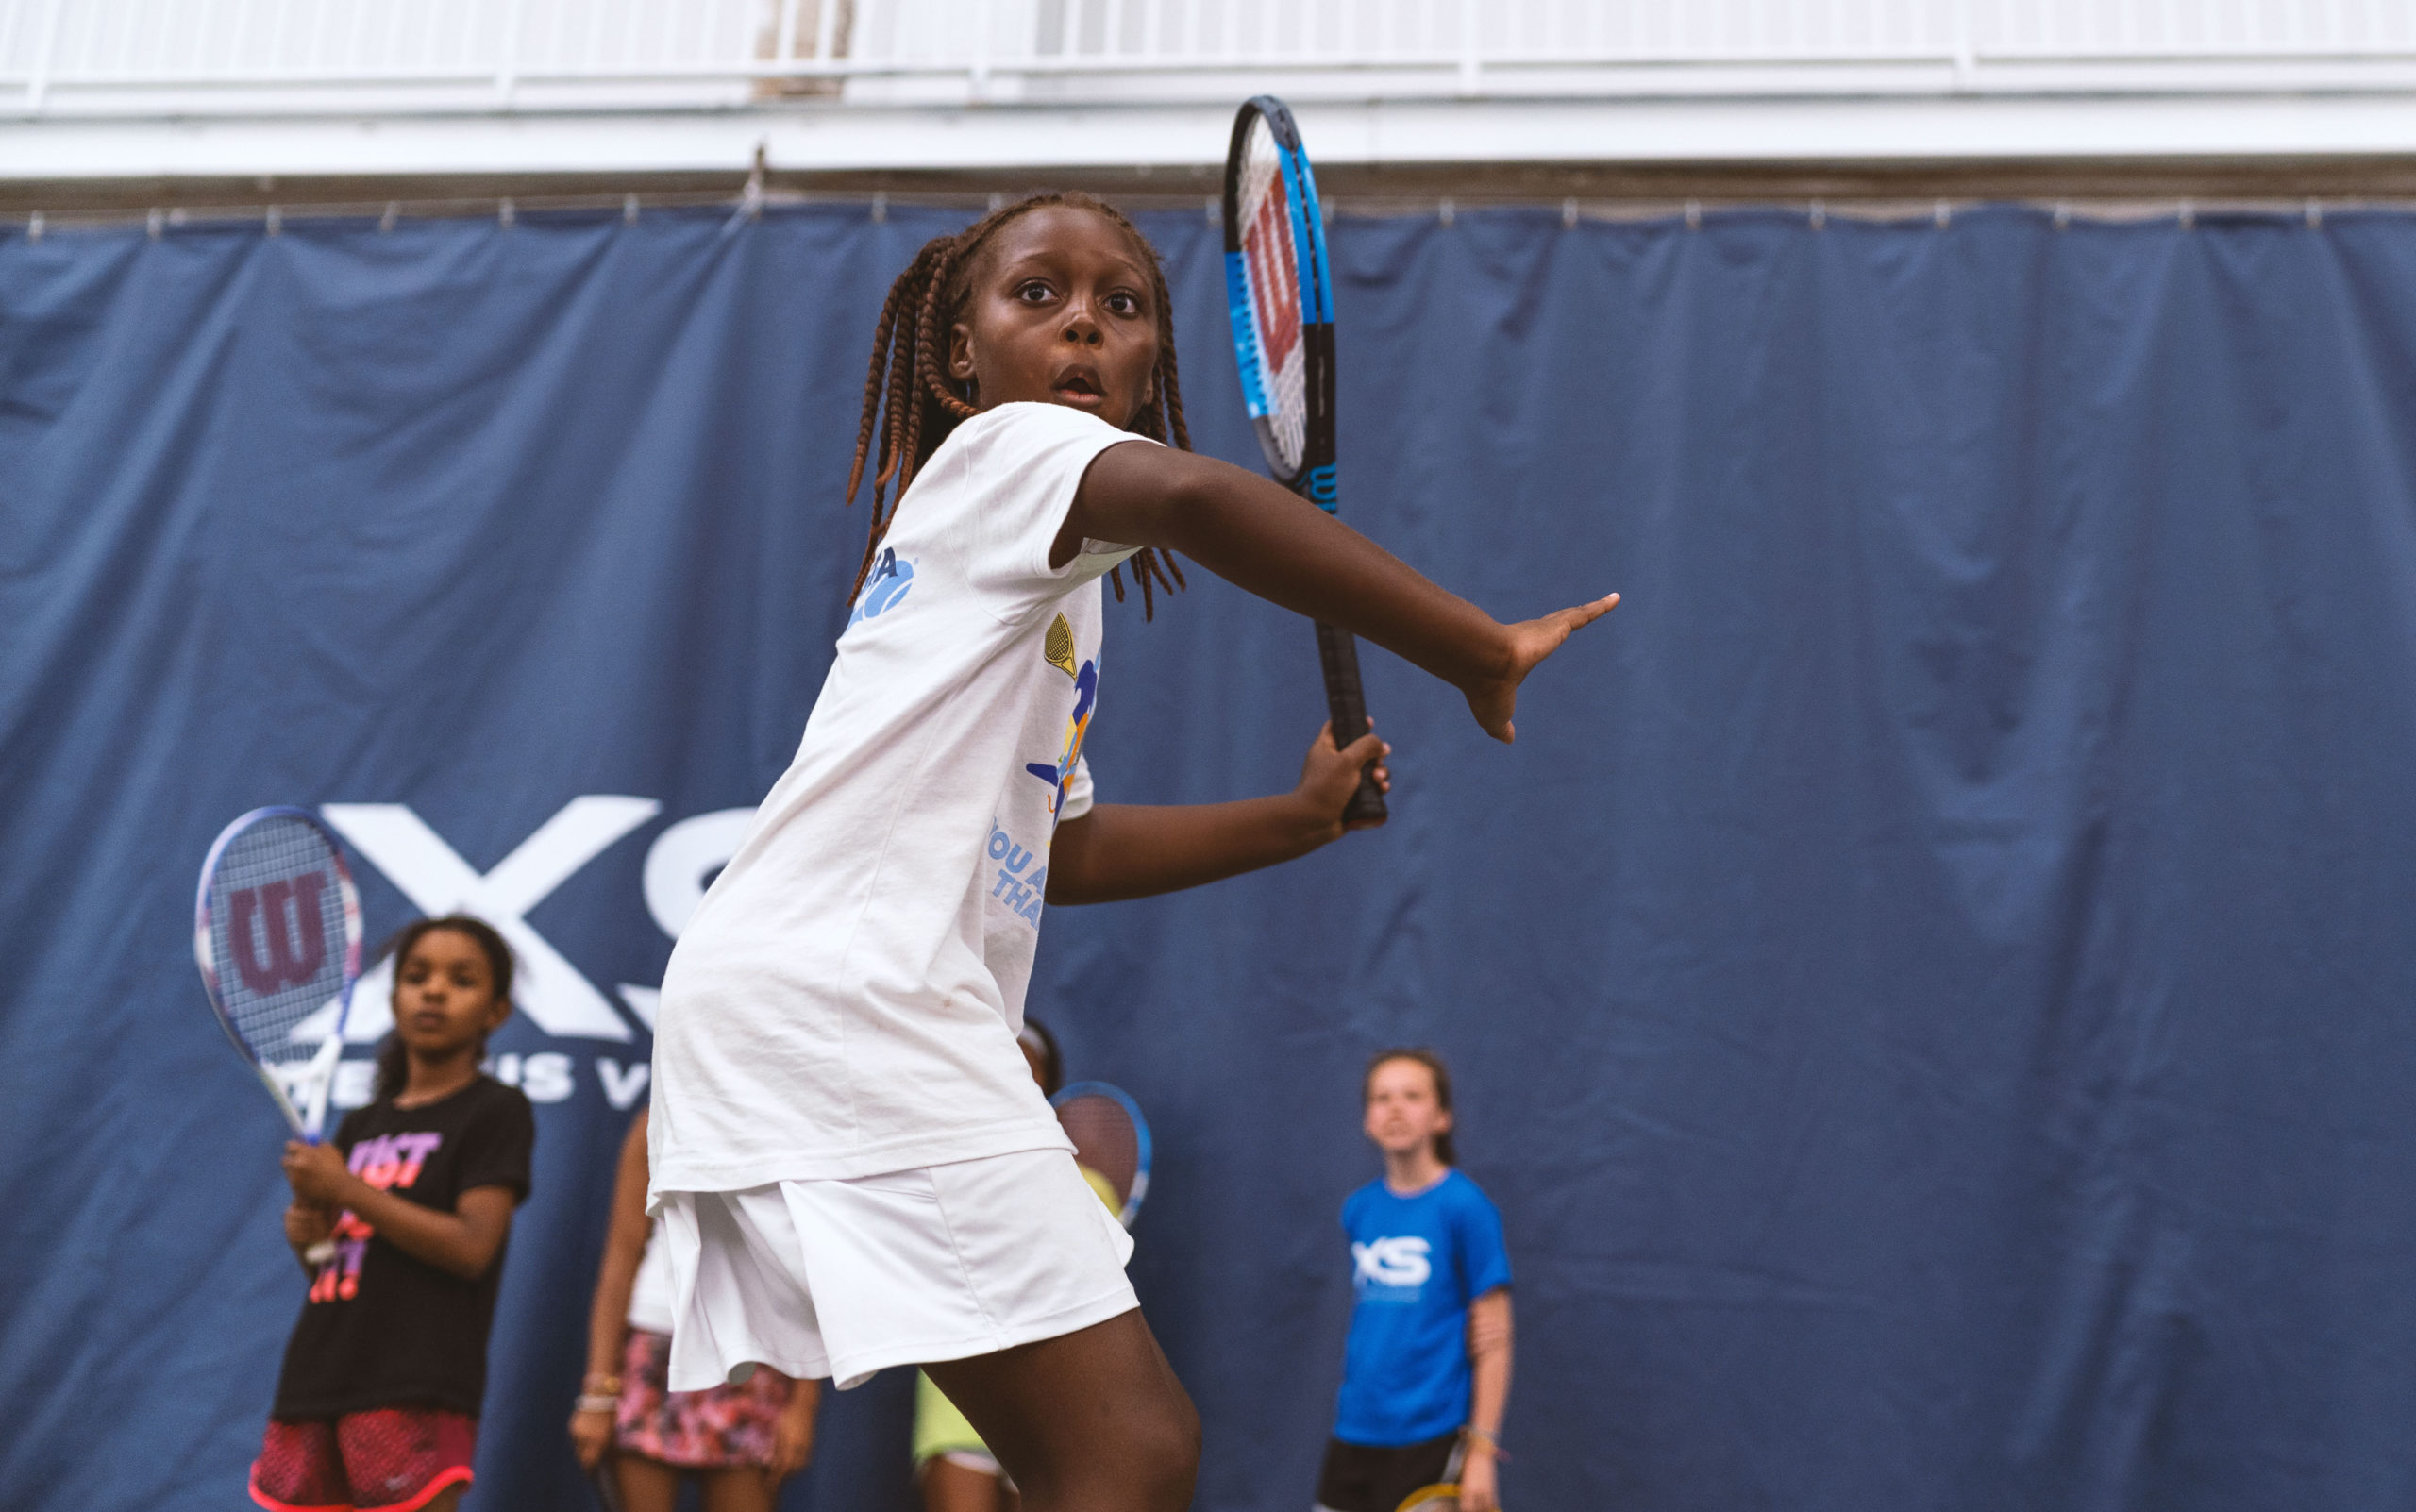 New National Report Sheds Light on Girls' Sports Participation